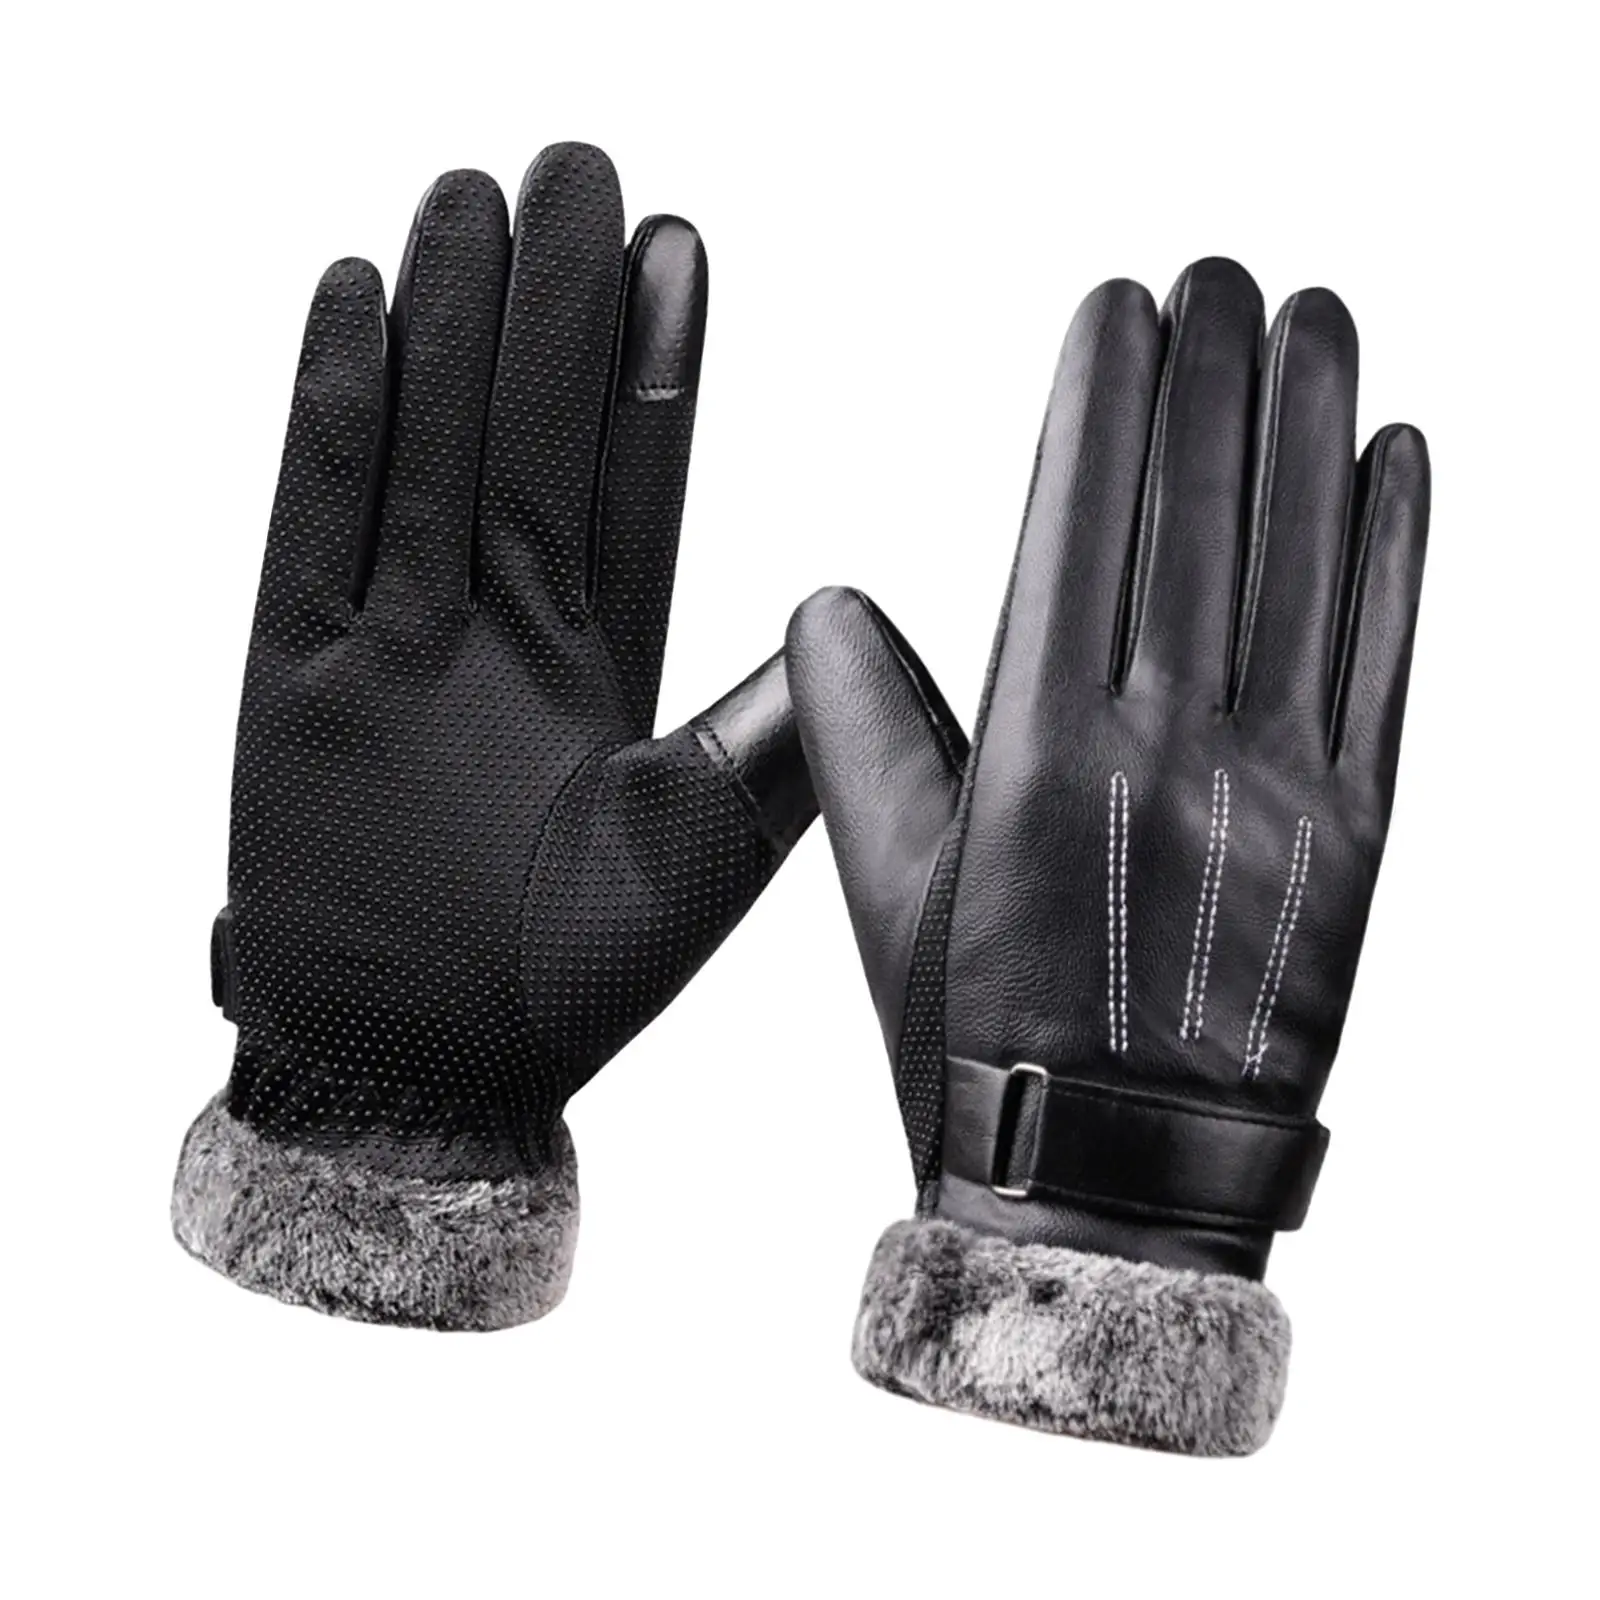 Women Winter Gloves PU Leather Warm Gloves Touchscreen Cycling Gloves for Riding